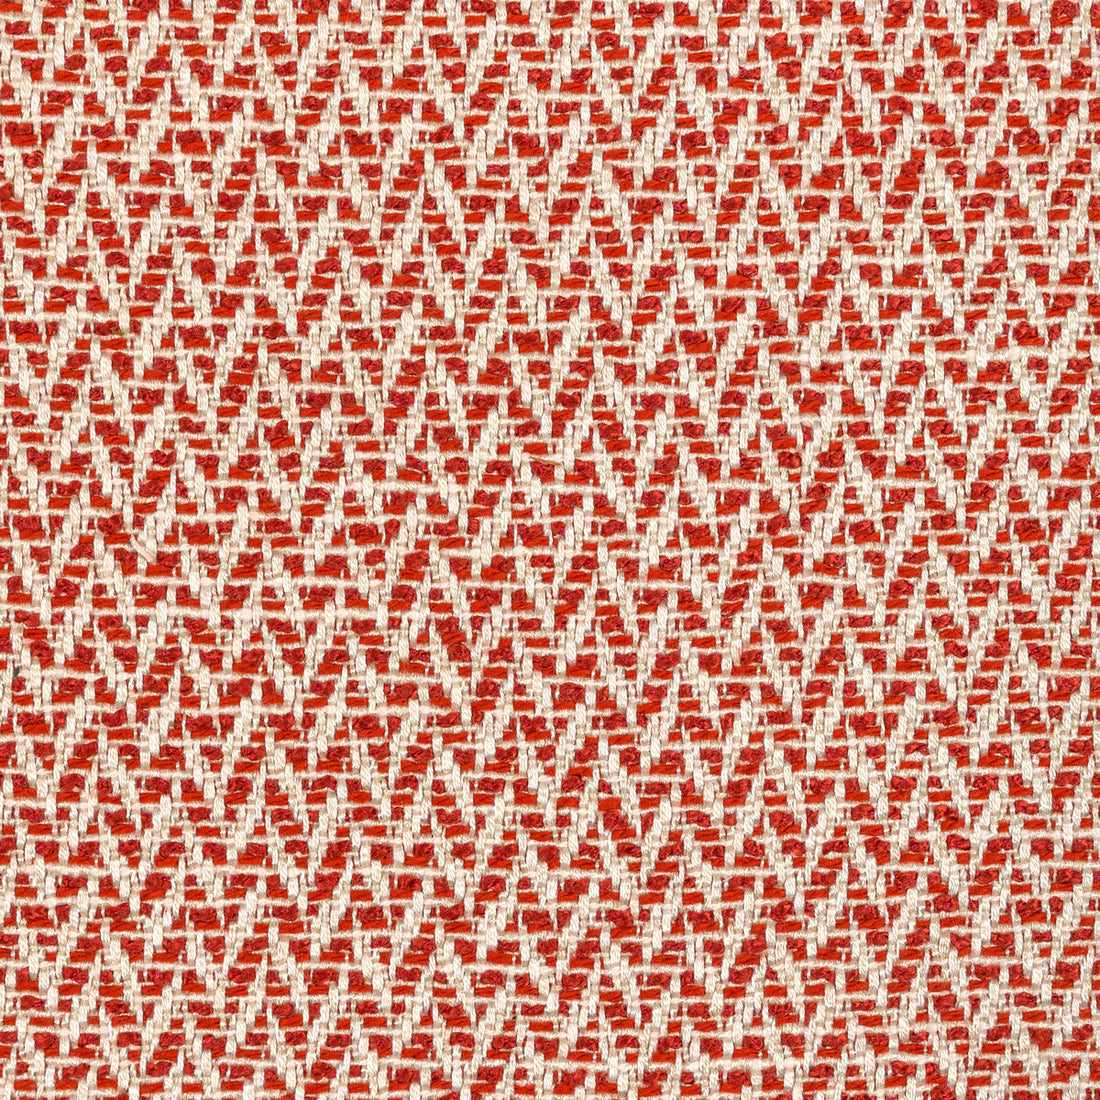 Kravet Design fabric in 36418-19 color - pattern 36418.19.0 - by Kravet Design in the Performance Crypton Home collection